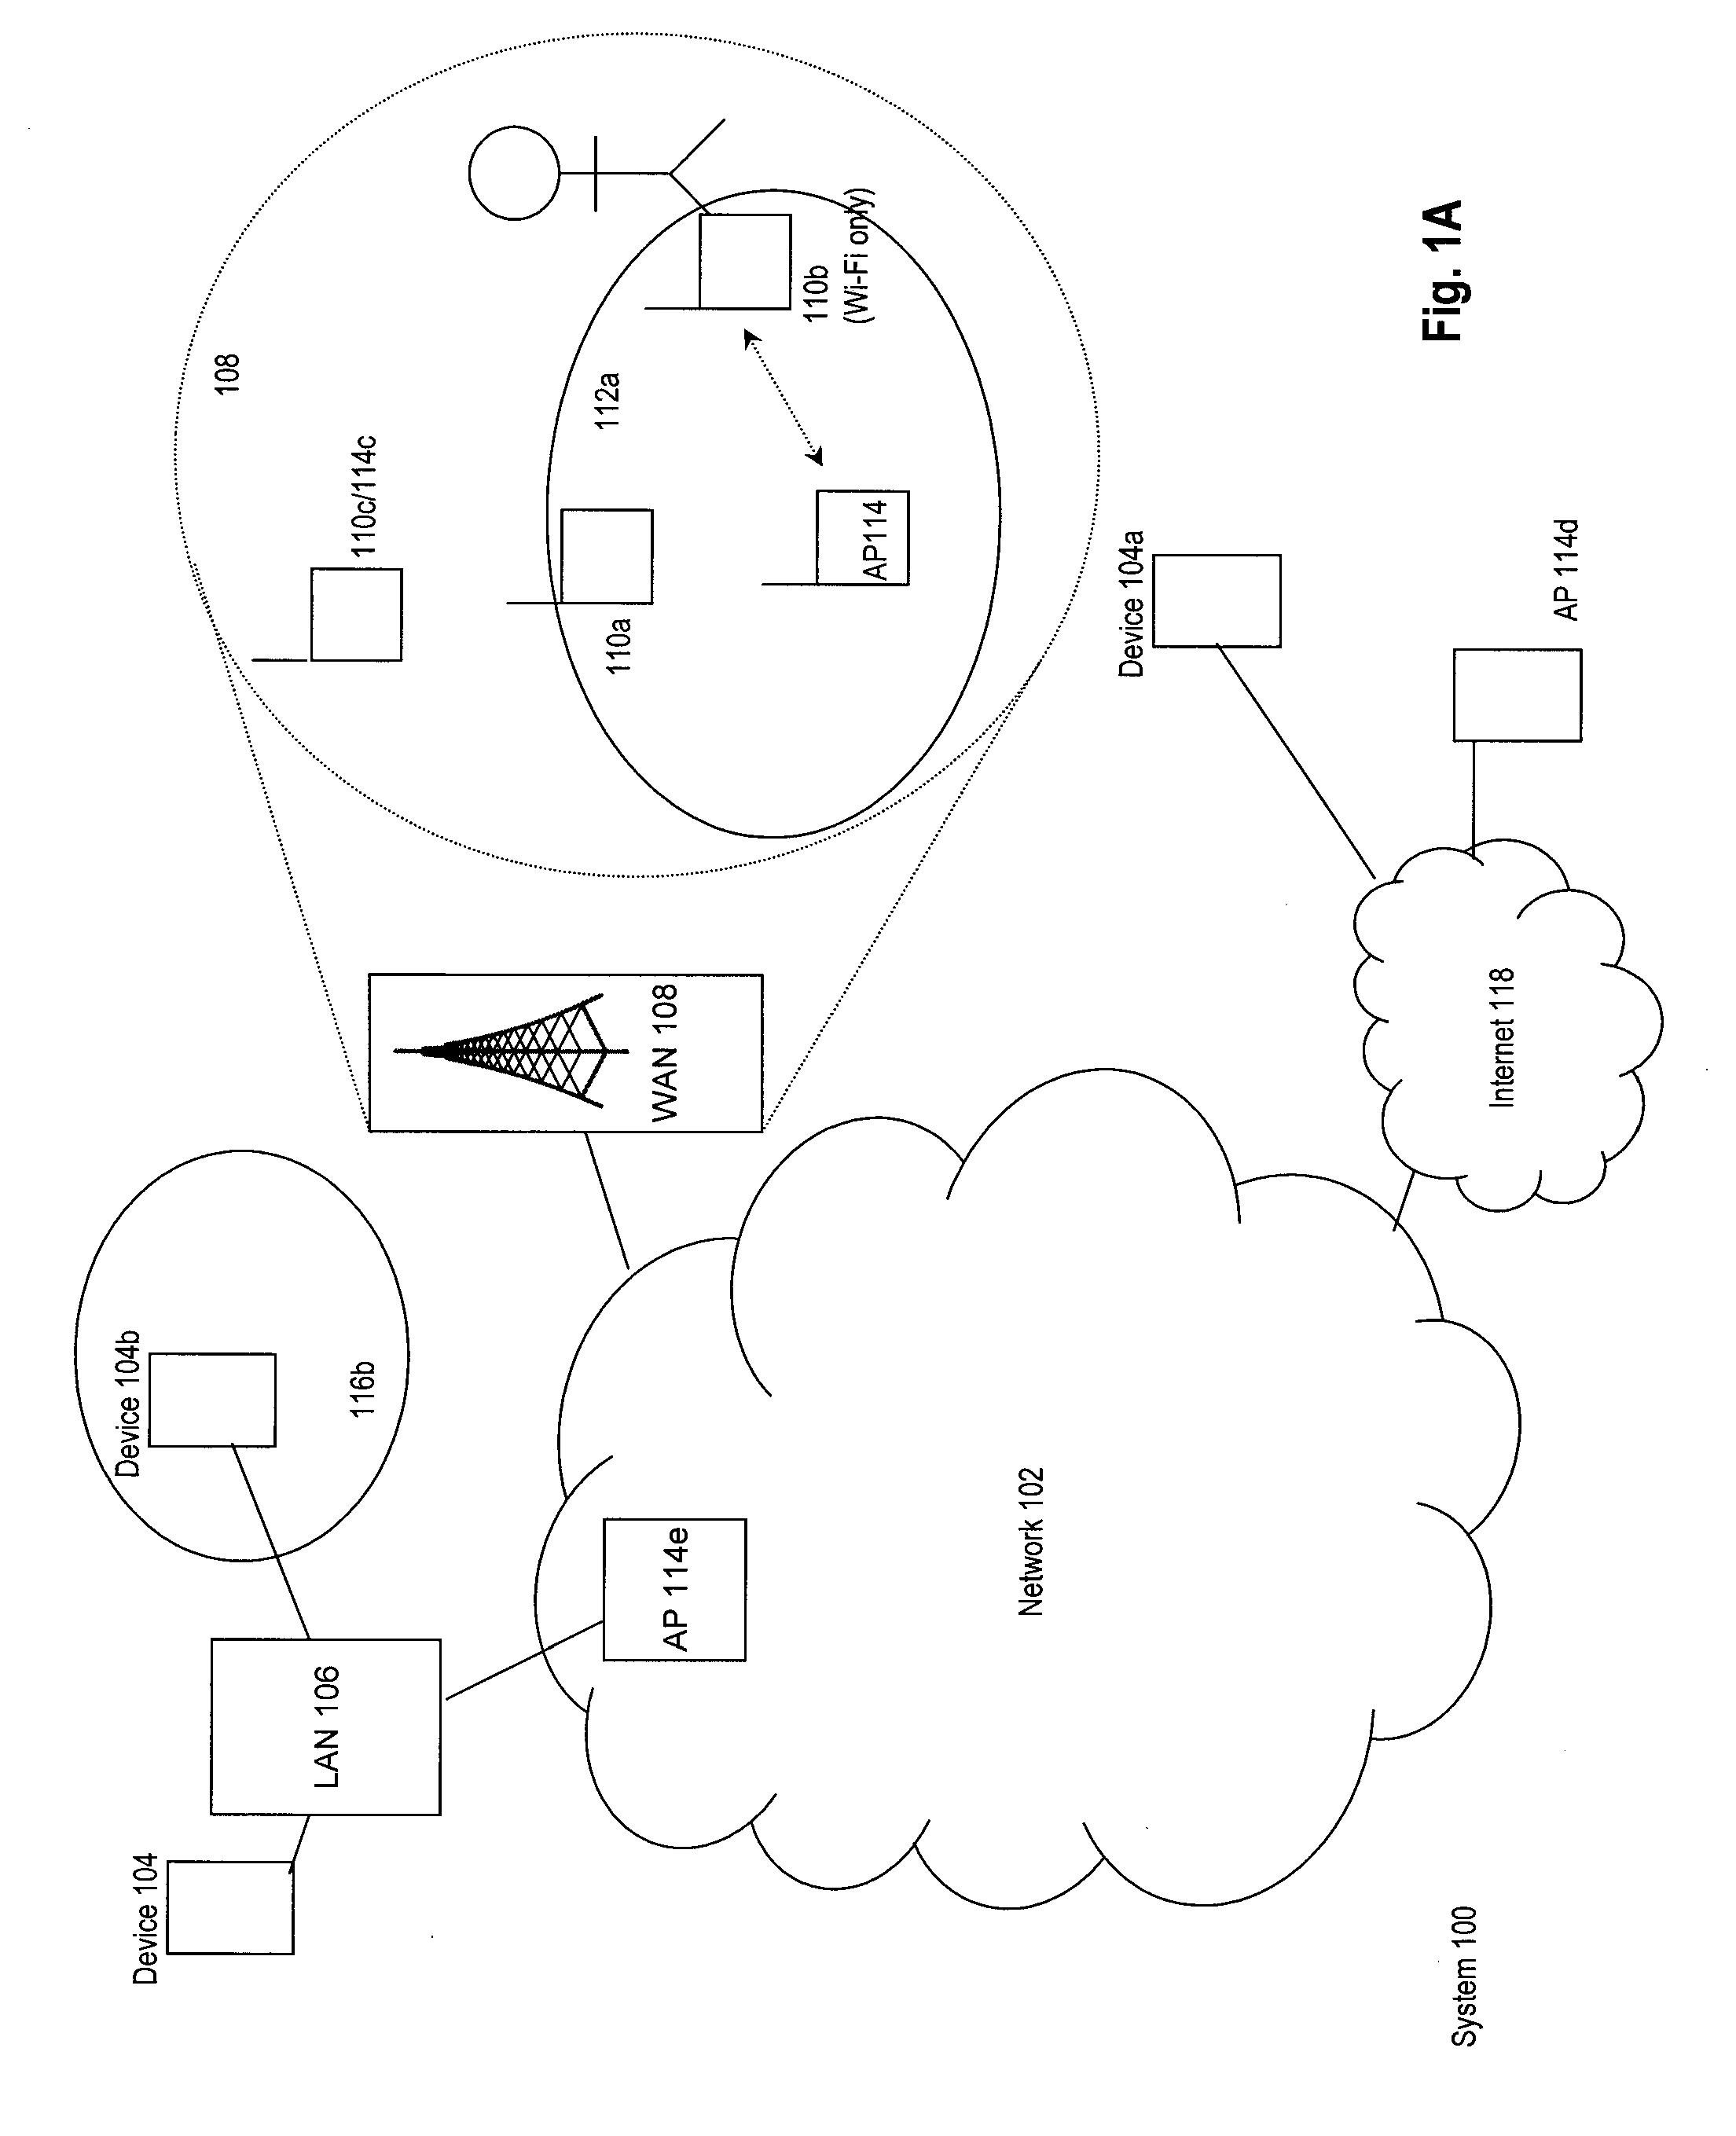 System and method for identifying an administrator for a communication network